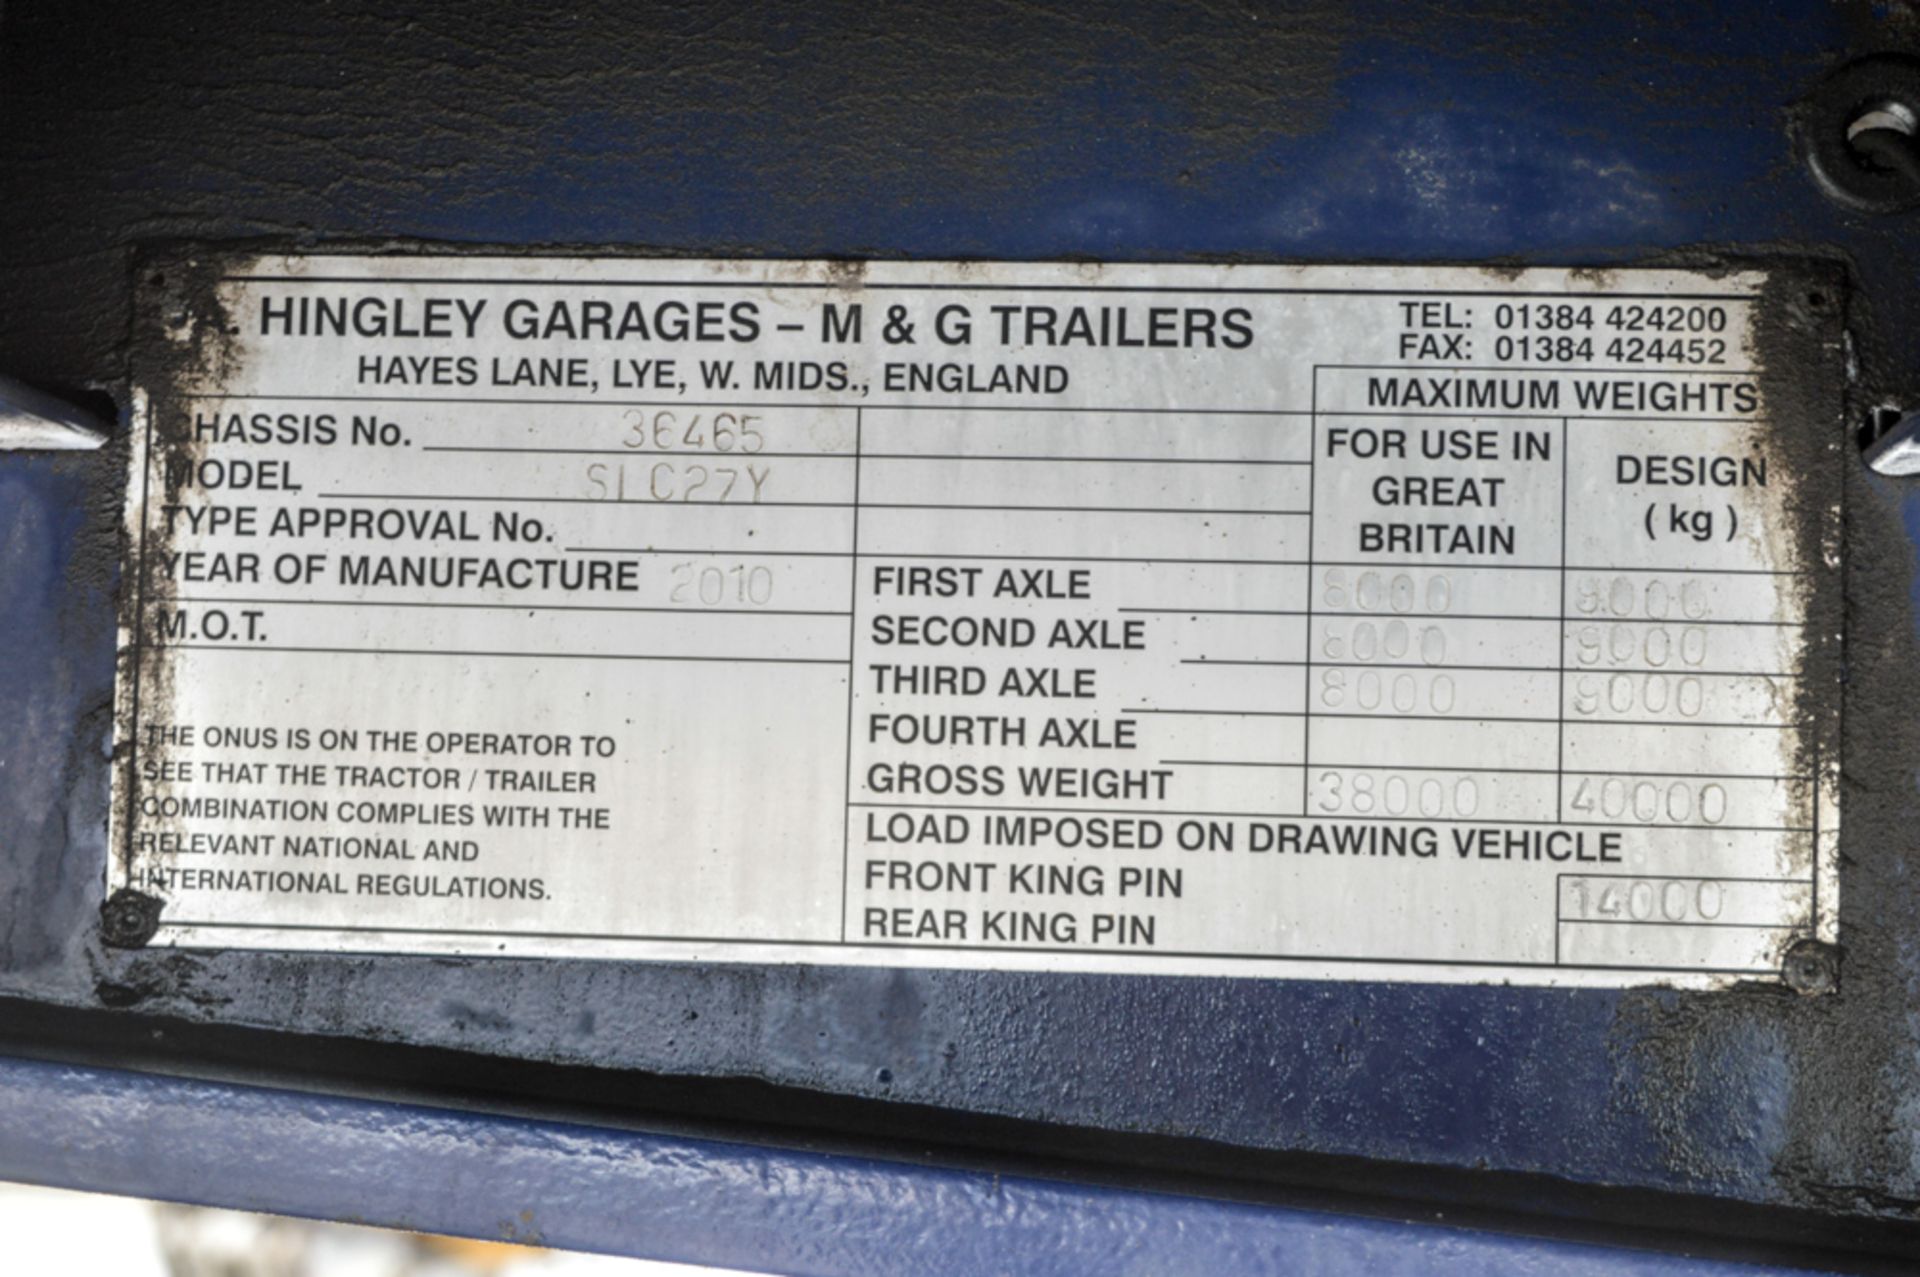 M&G SLC 27Y stepframe low loader trailer Year: 2010 MOT Expires: 30/06/2018 Chassis No: 36465 c/w - Image 12 of 12